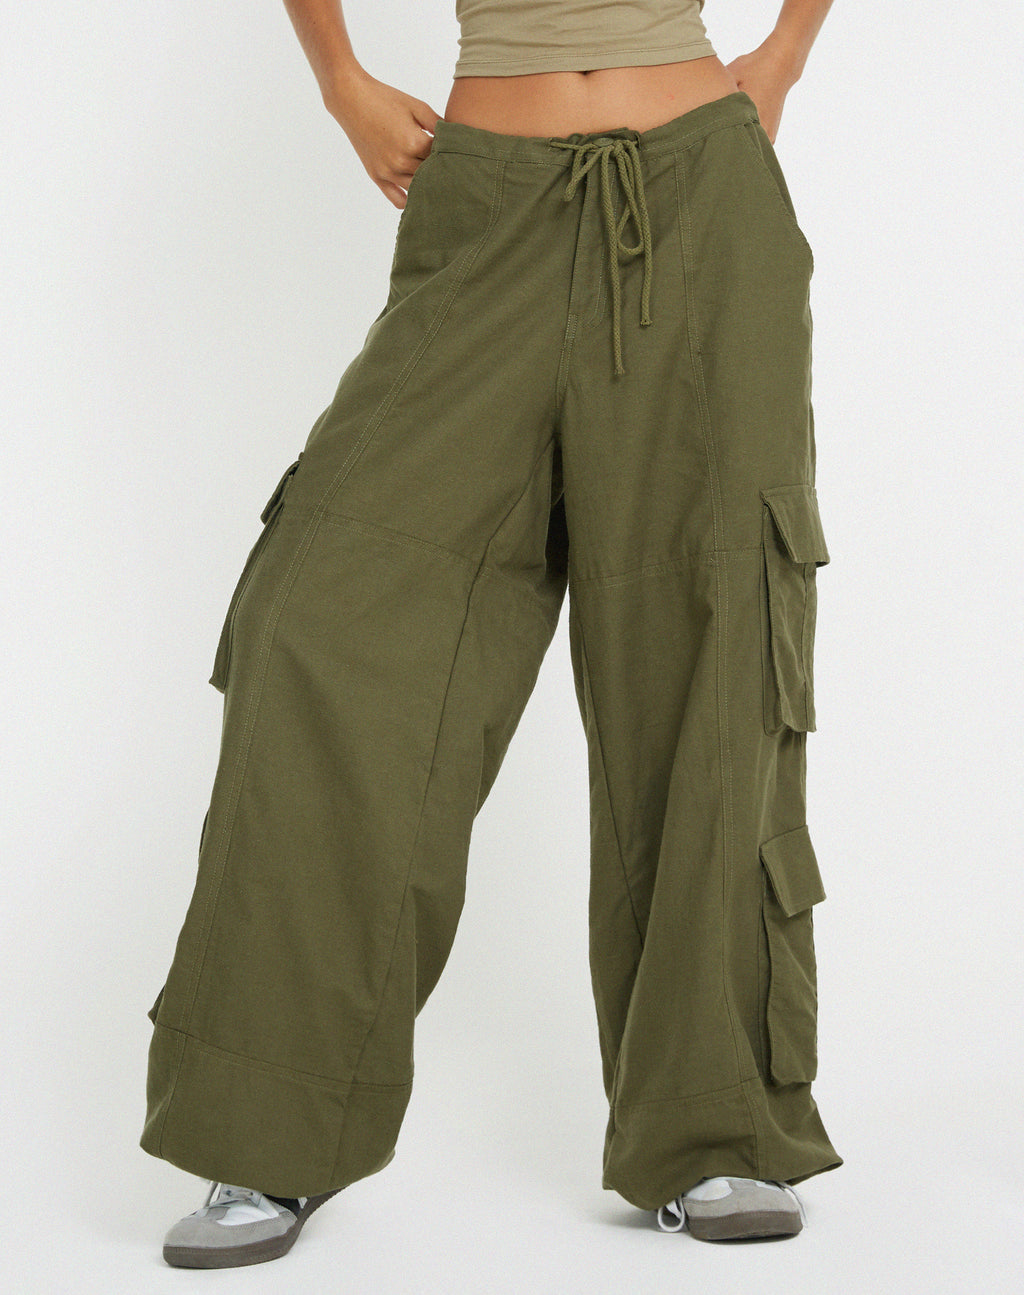 Philia Trouser in Loden Green